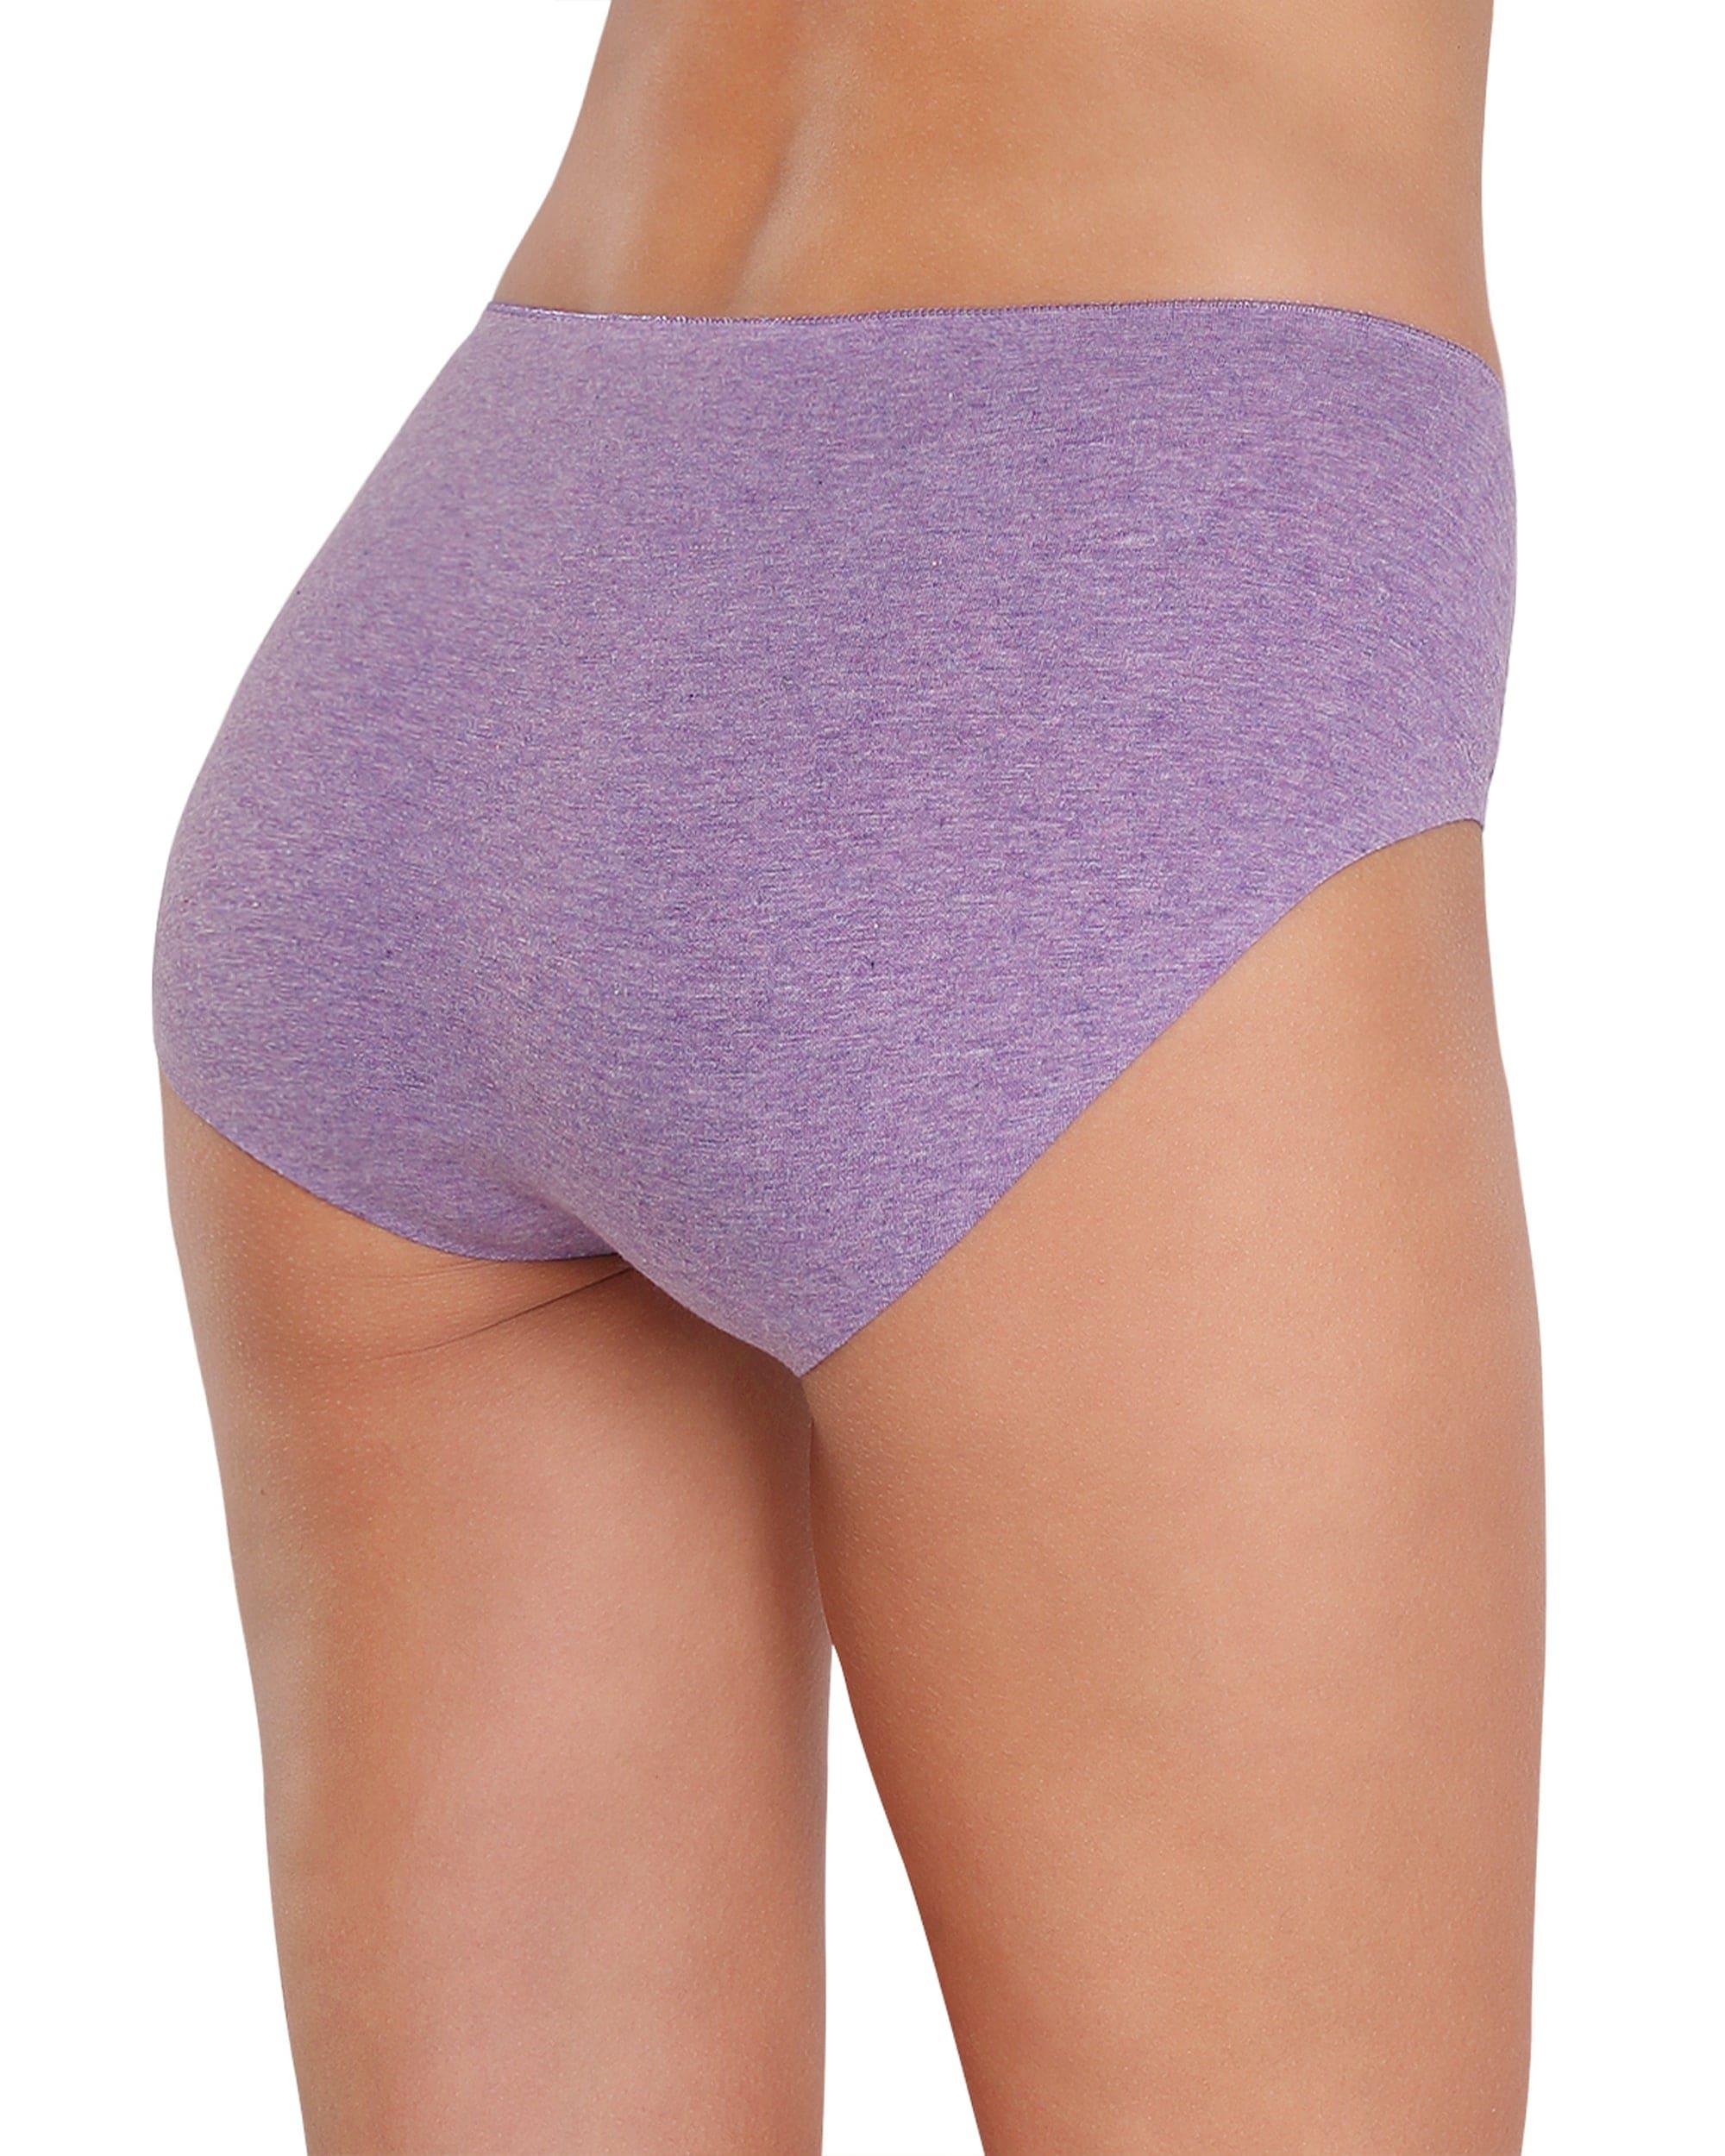 6 Pack Womens Ultra Thin Commuter Seamless Cotton Panties Quick Drying,  Breathable, And Traceless Low Waist Briefs In One Size For Ladies From  Shulasi, $20.53